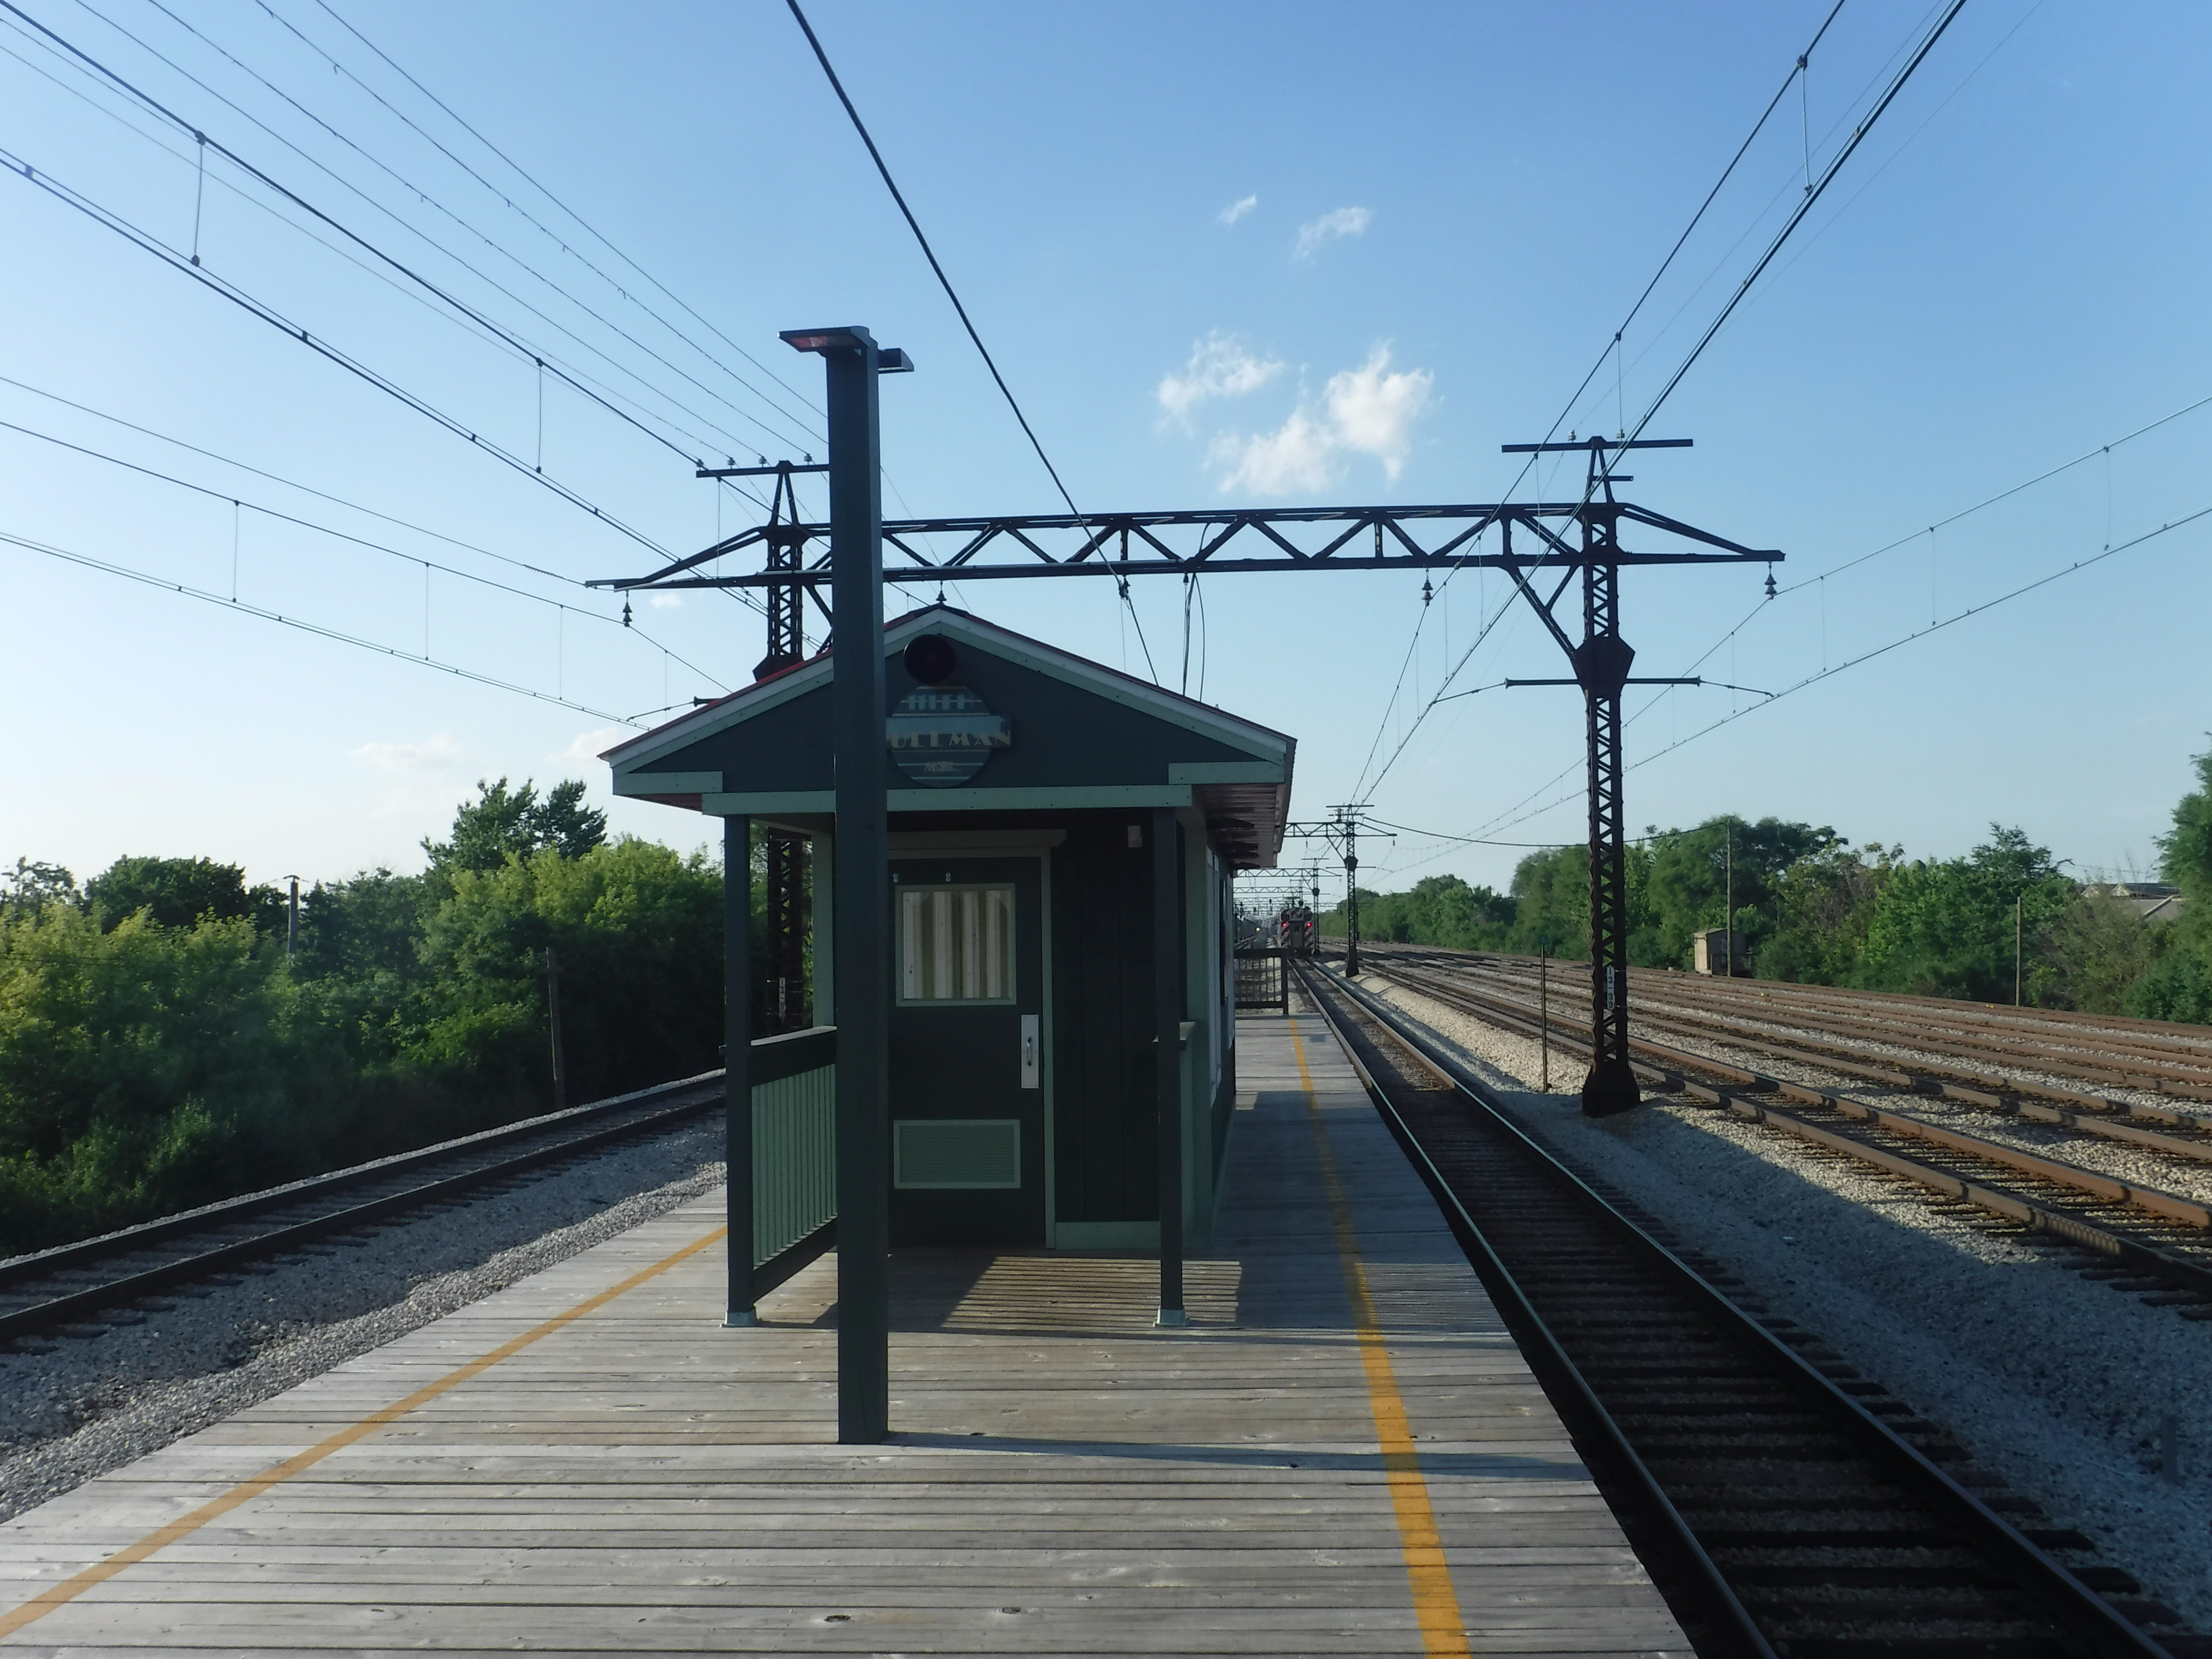 Metra proposes major South Side service overhaul - Chronicle Media